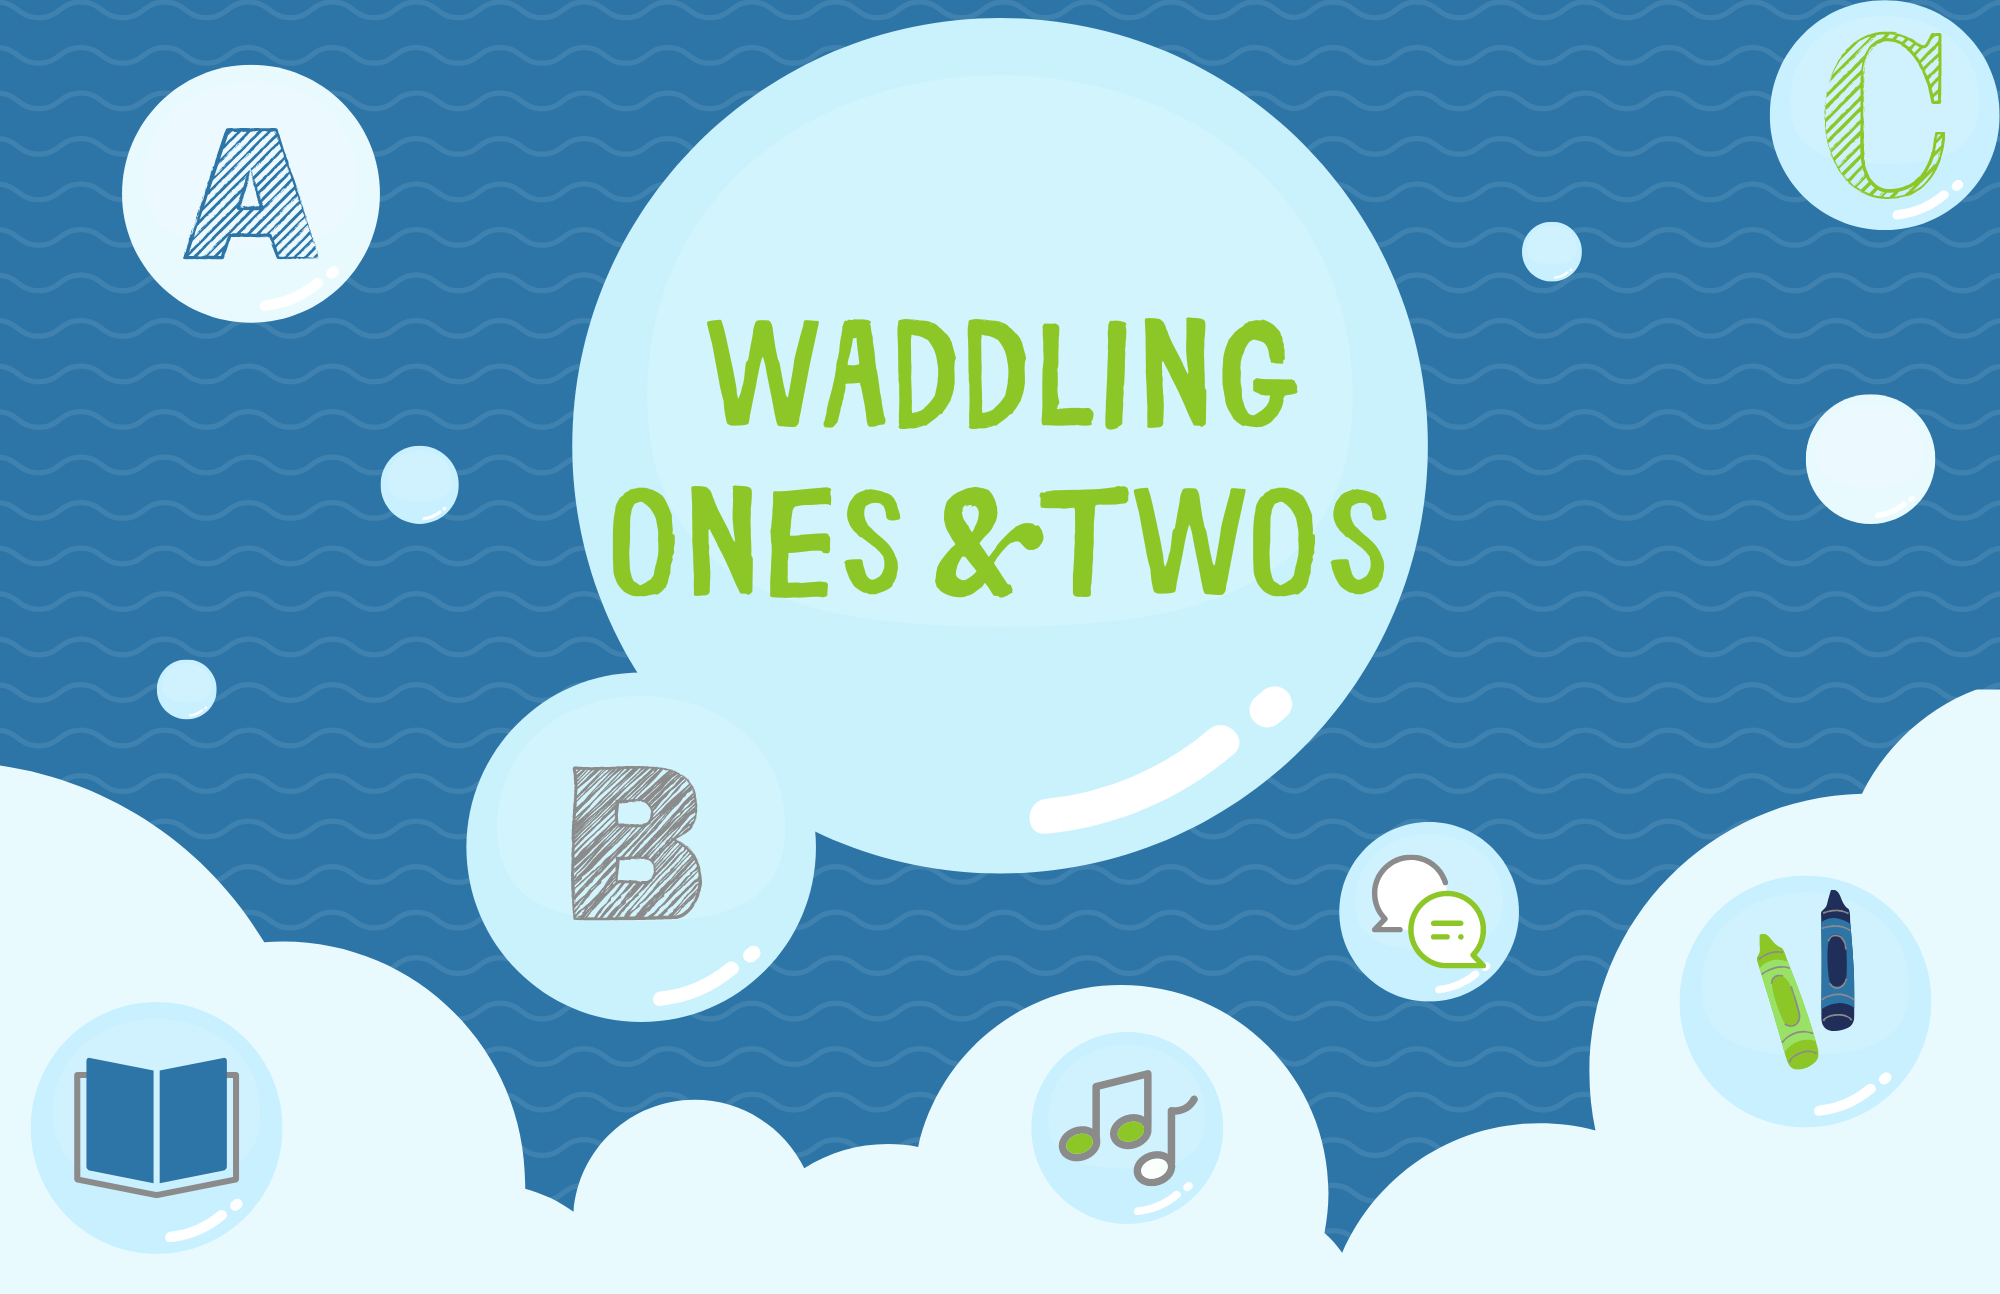 Bubbles with the text "Waddling Ones & Twos" in the middle